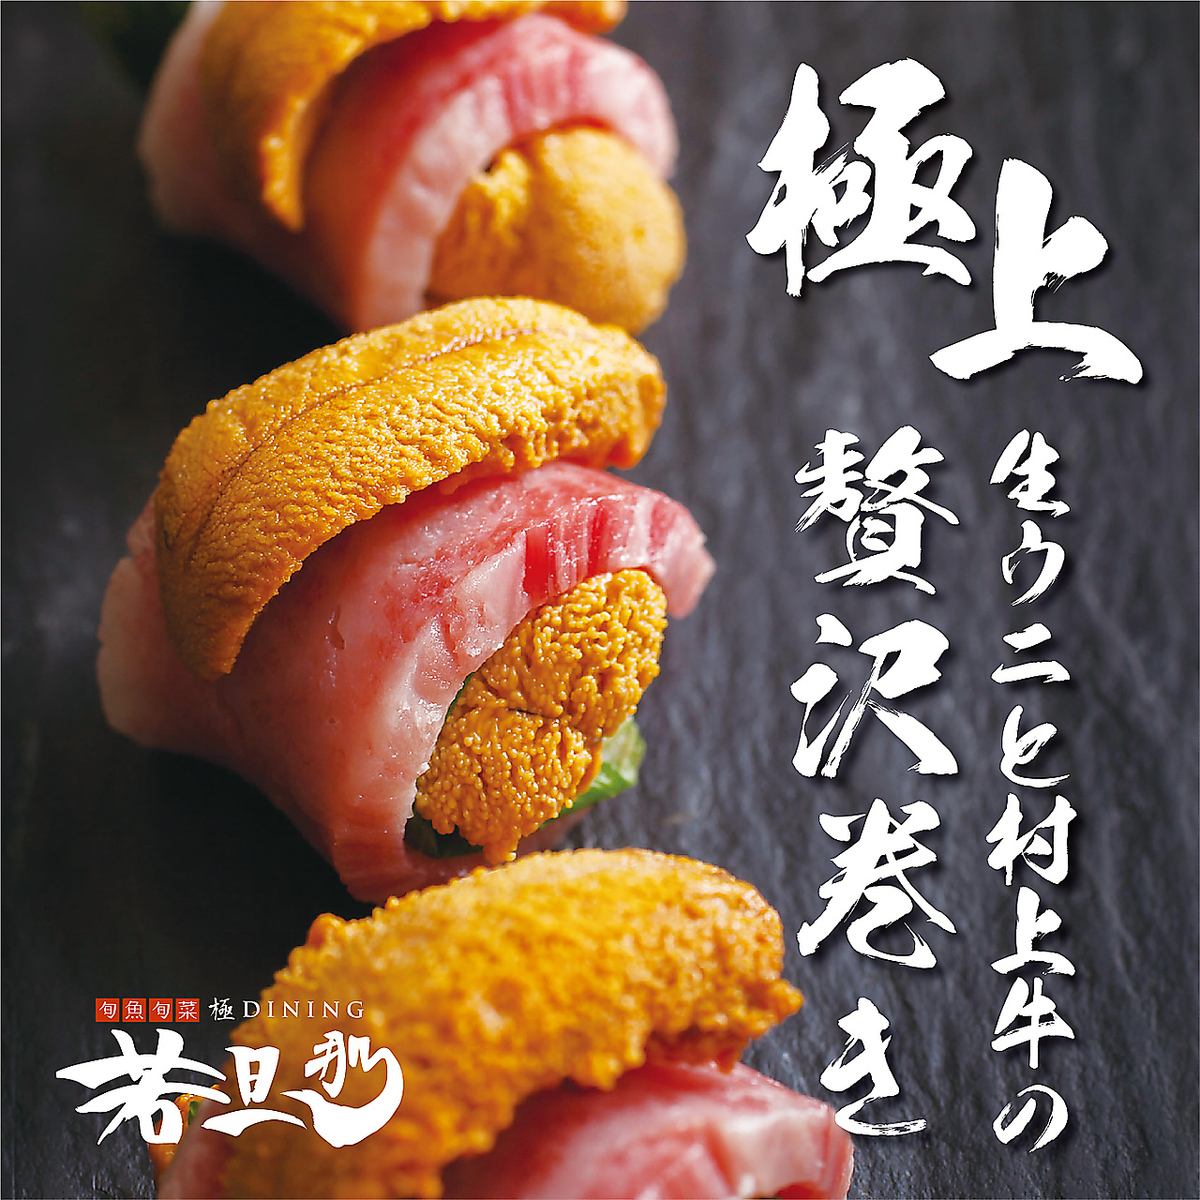 Enjoy the finest taste of the famous "luxury roll of the finest raw sea urchin and Murakami beef"!